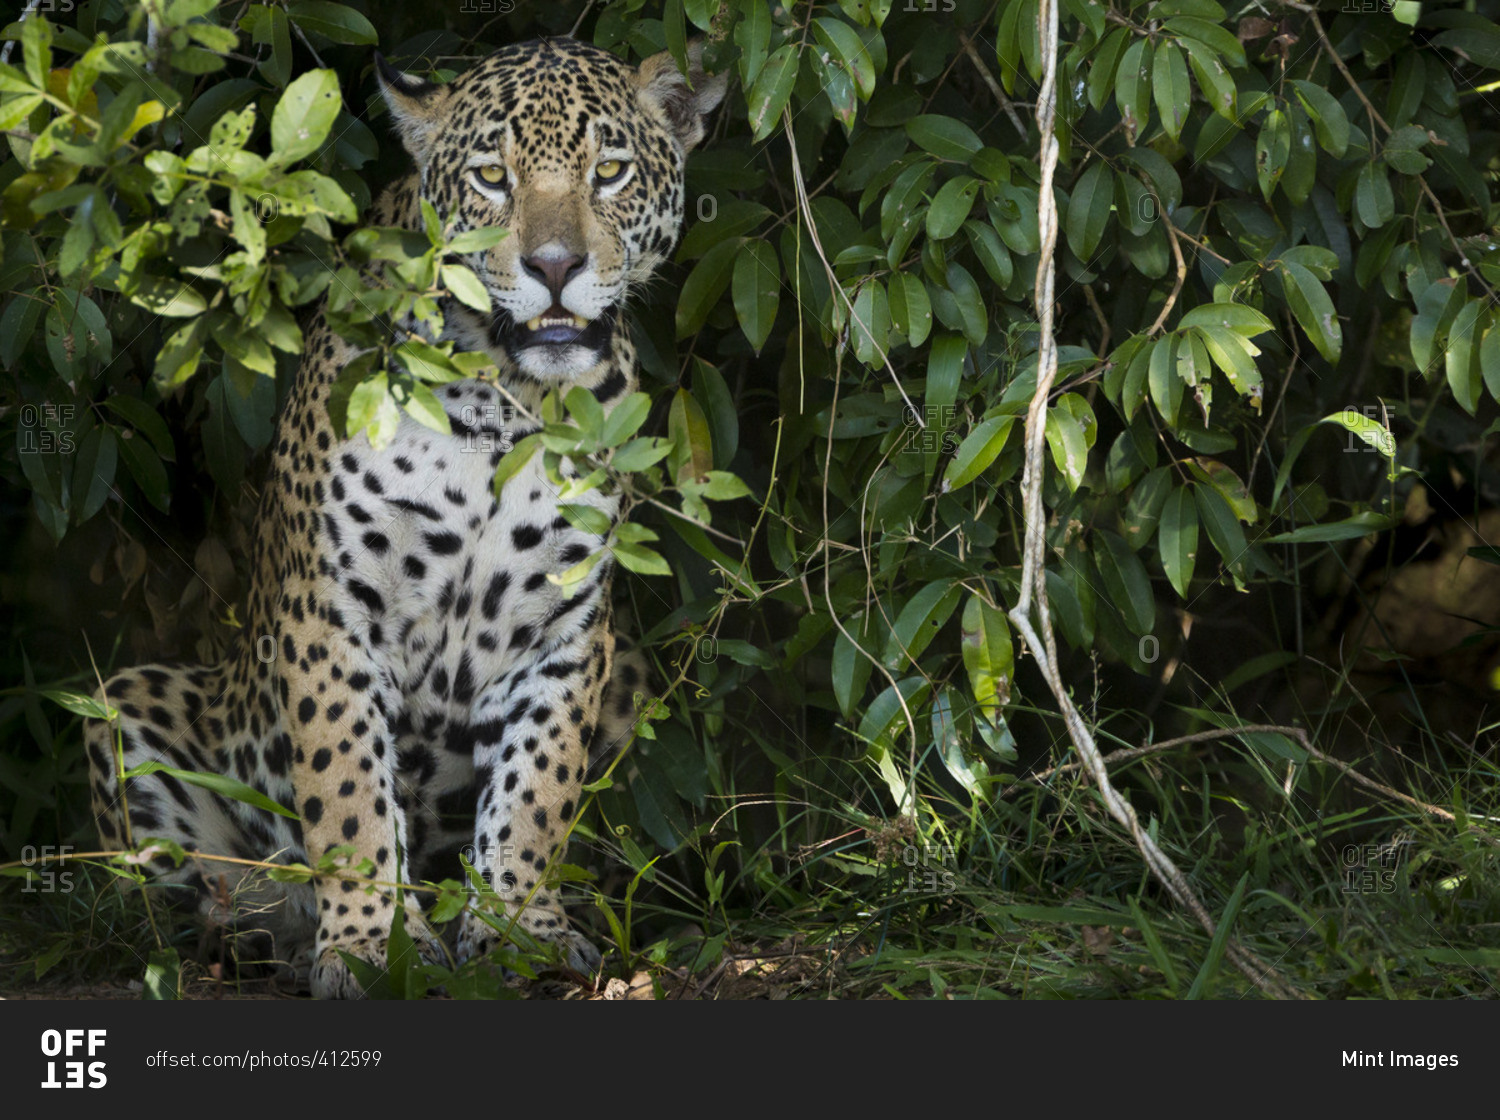 Jaguar, a young animal peering out from the foliage in the forest in Brazil